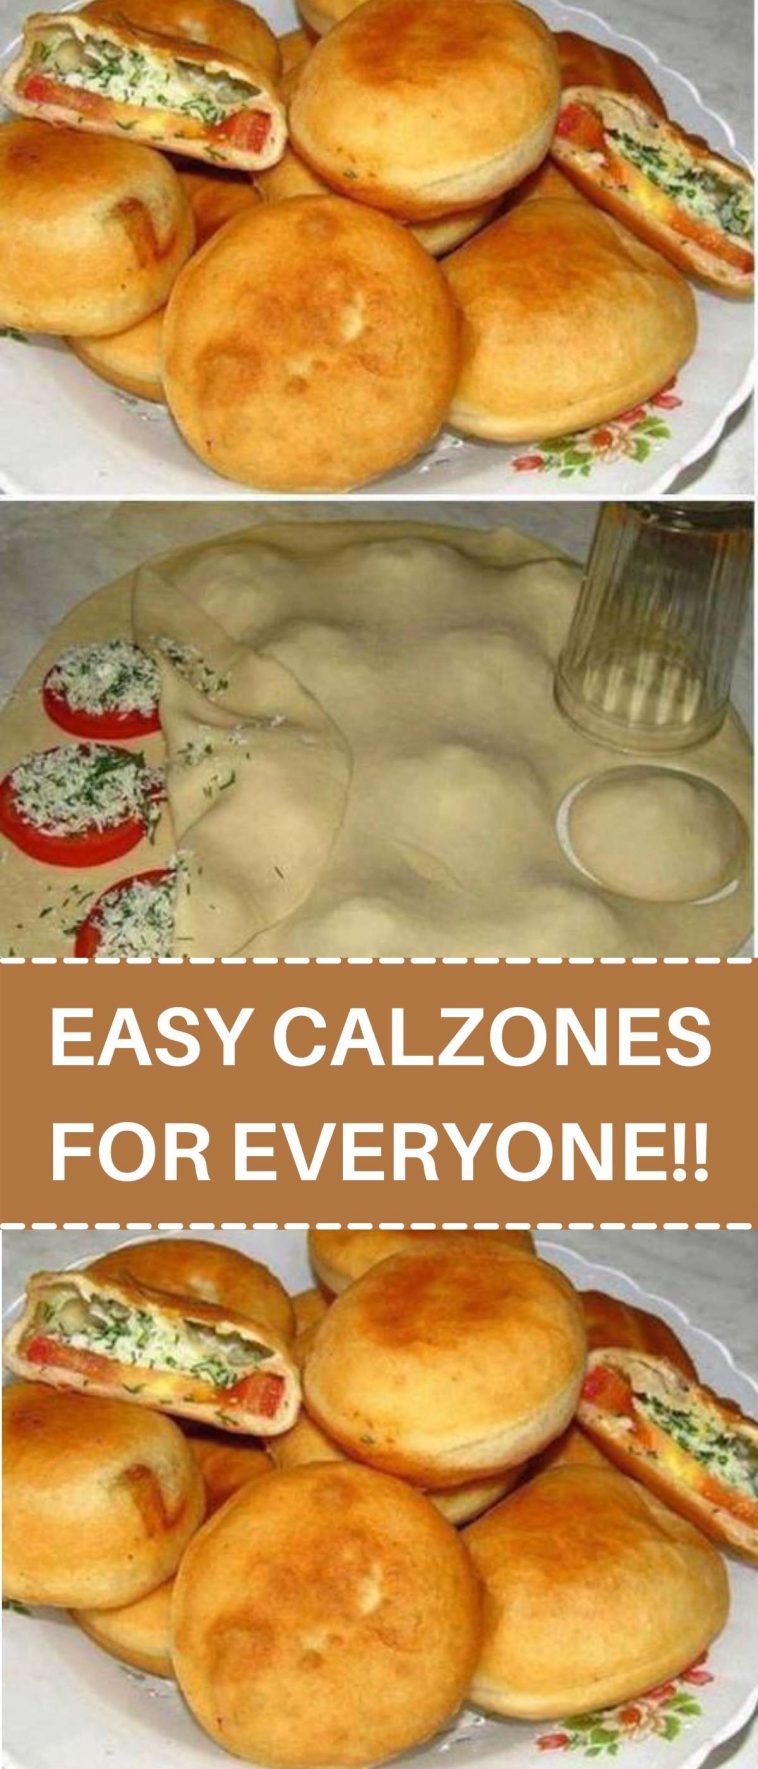 EASY CALZONES FOR EVERYONE!!